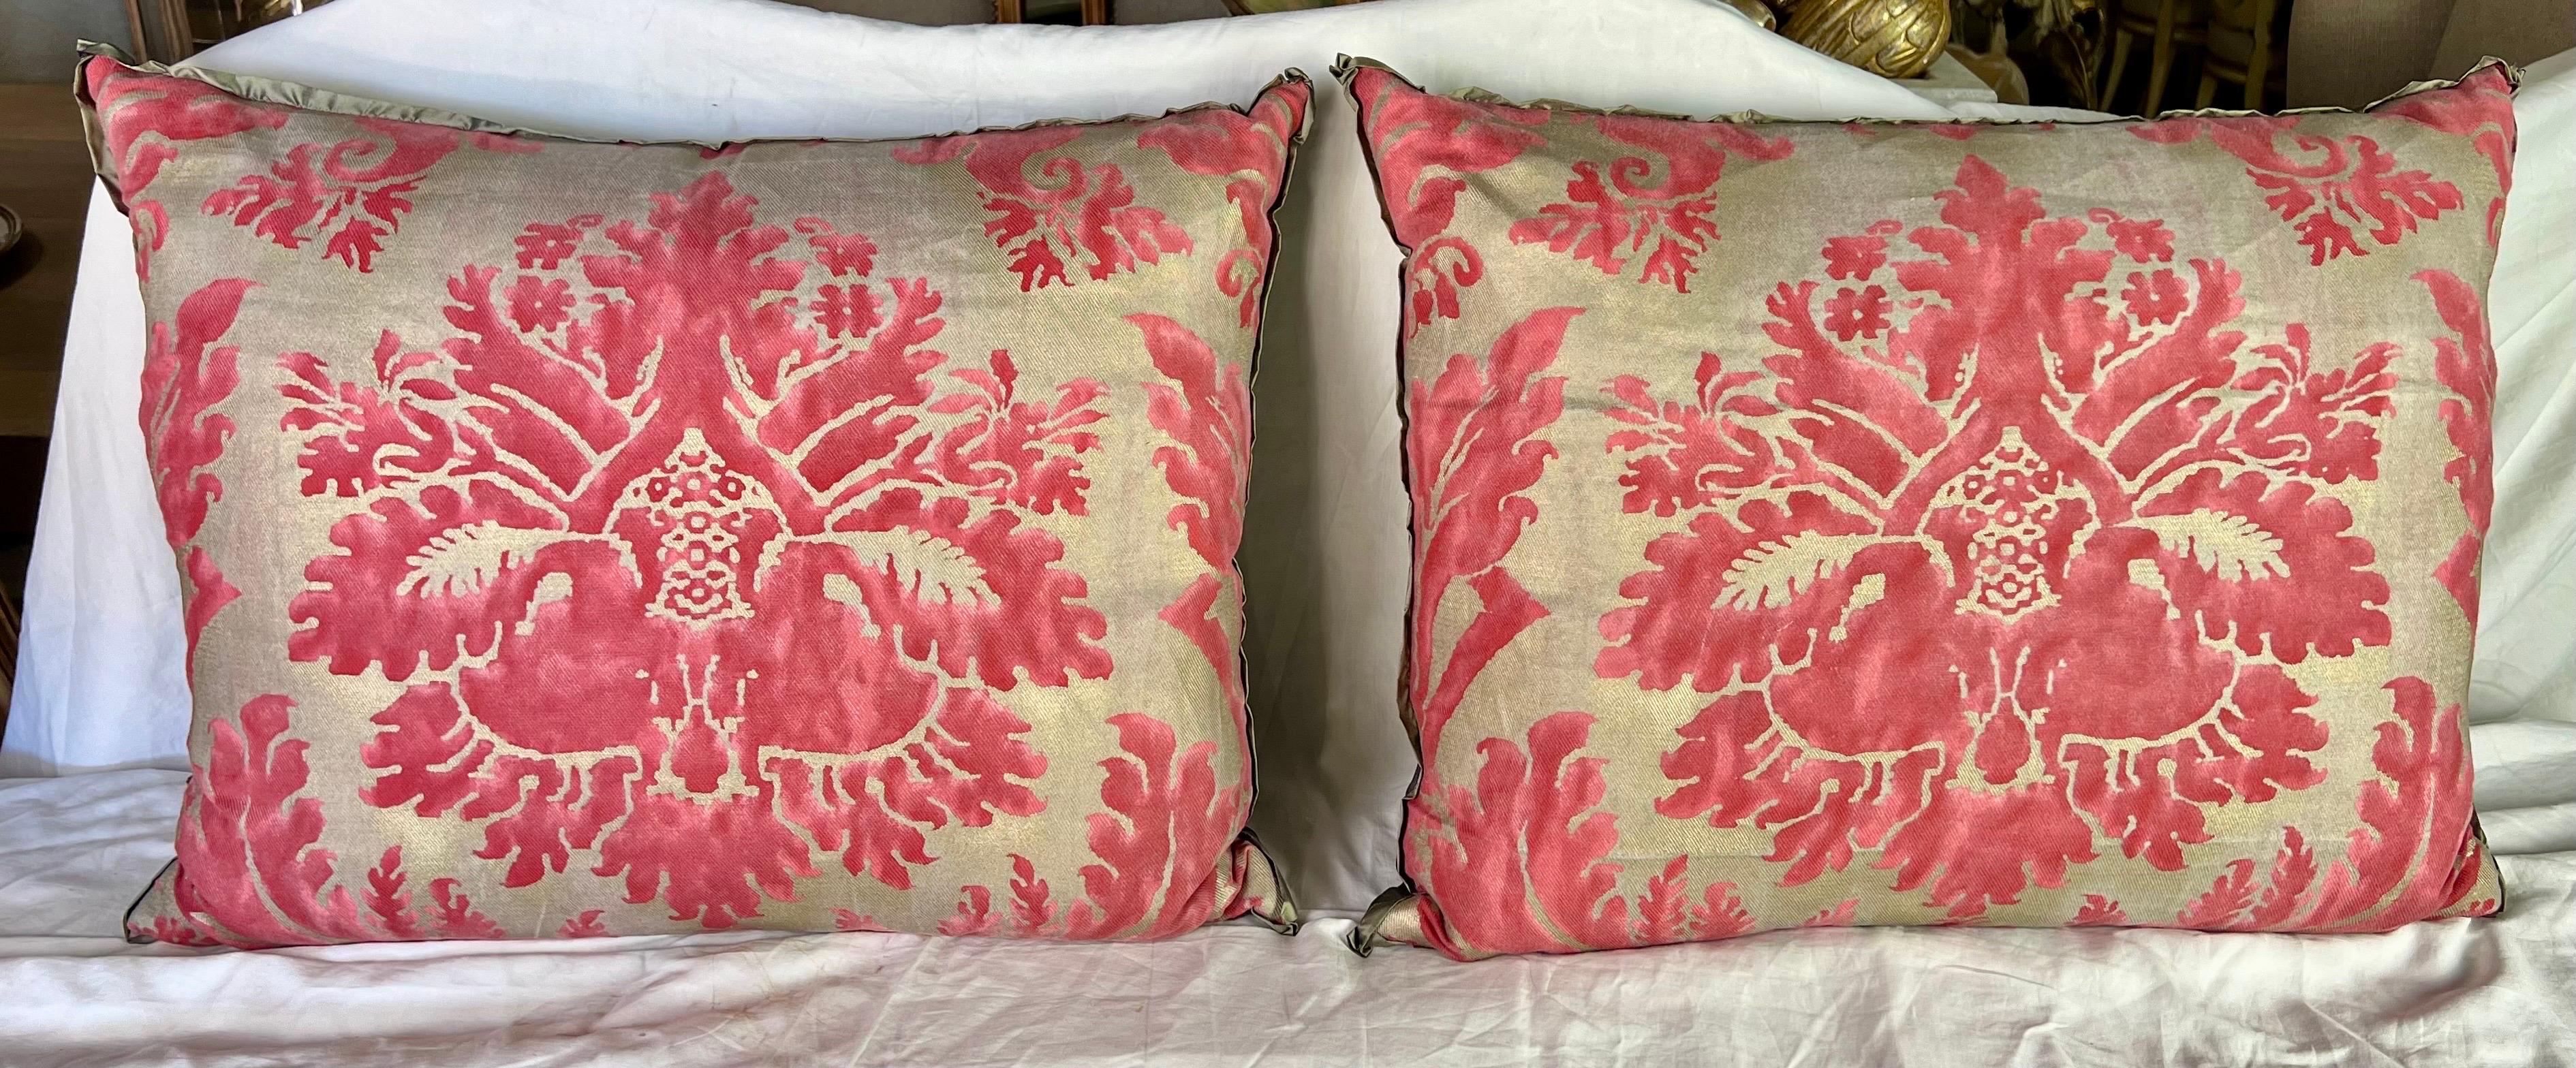 The combination of pink and gold Fortuny textile pillows from Italy featuring a gray silk back and down inserts, brings a luxurious touch and elegant contrast to your decor.